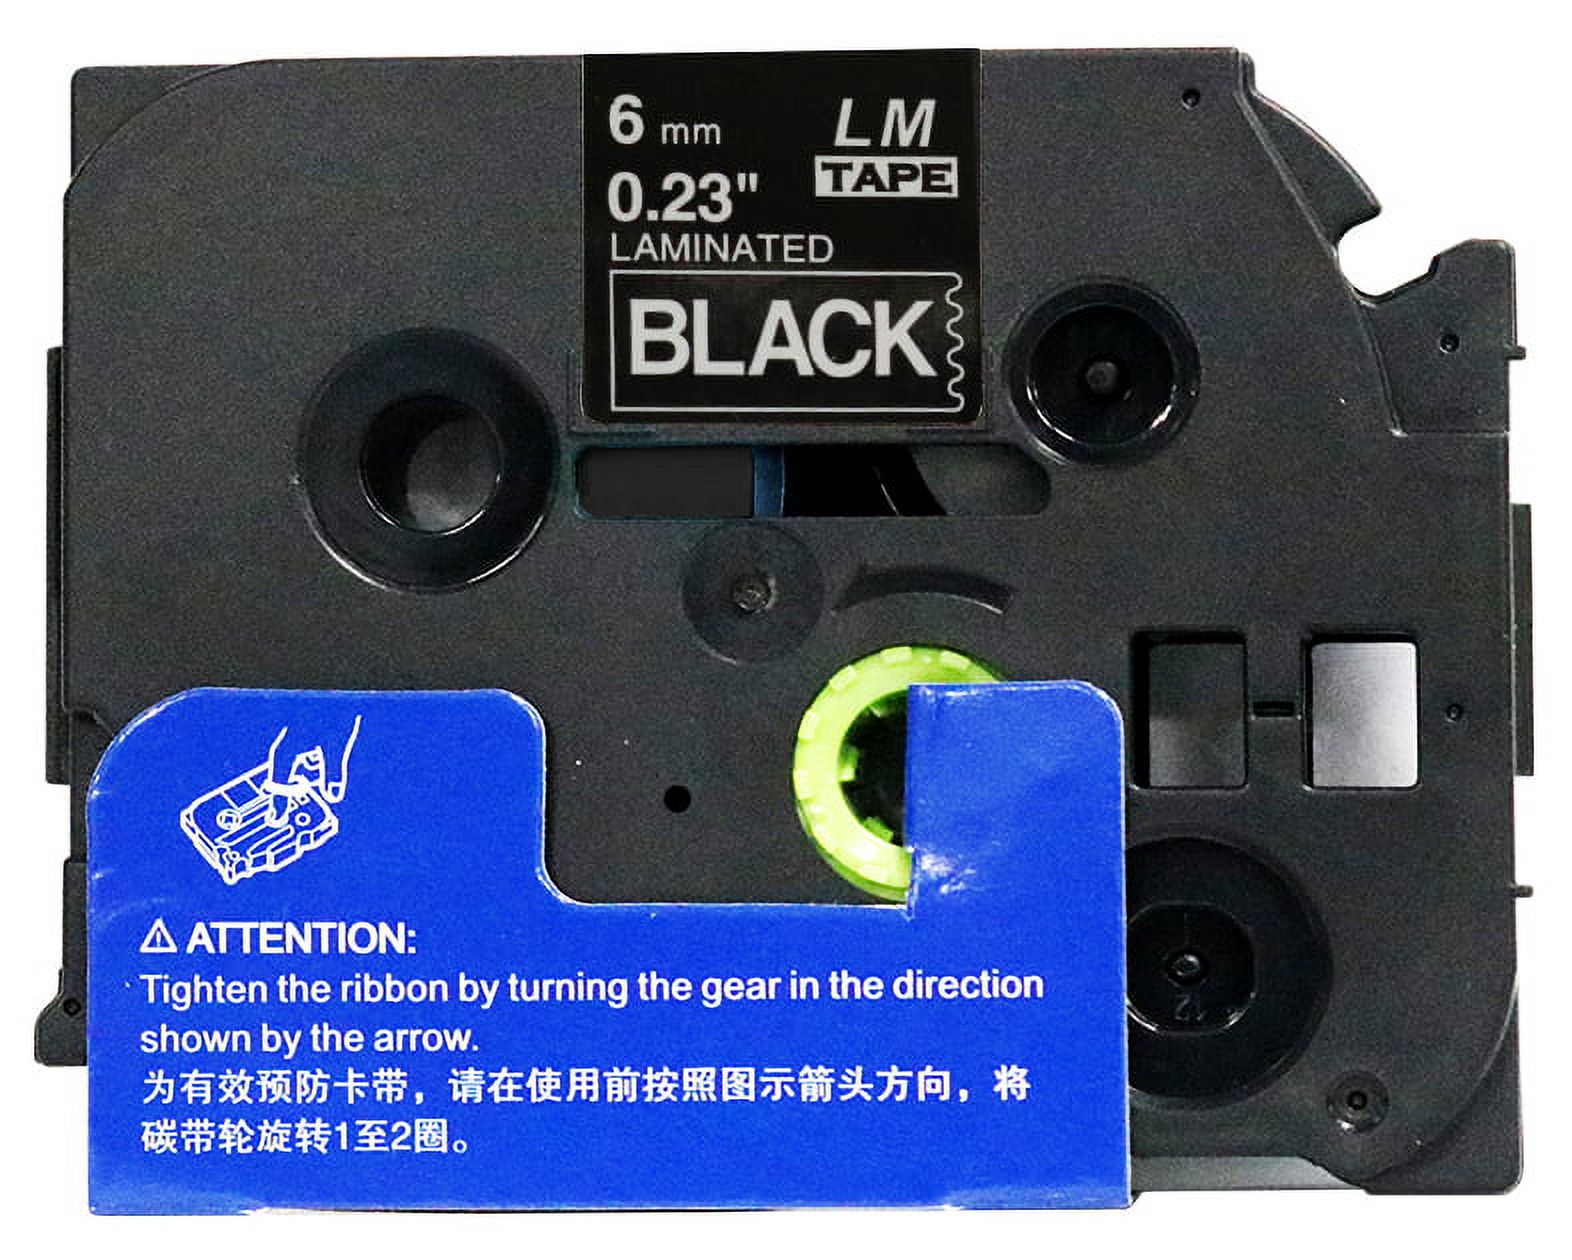 LM Tapes - Premium 1/4" White Print on Black Label (6mm 0.23 Laminated) compatible with TZe-315 P-touch Tape comes with Free Tape Color/Size Guide for easy reordering. - image 2 of 2